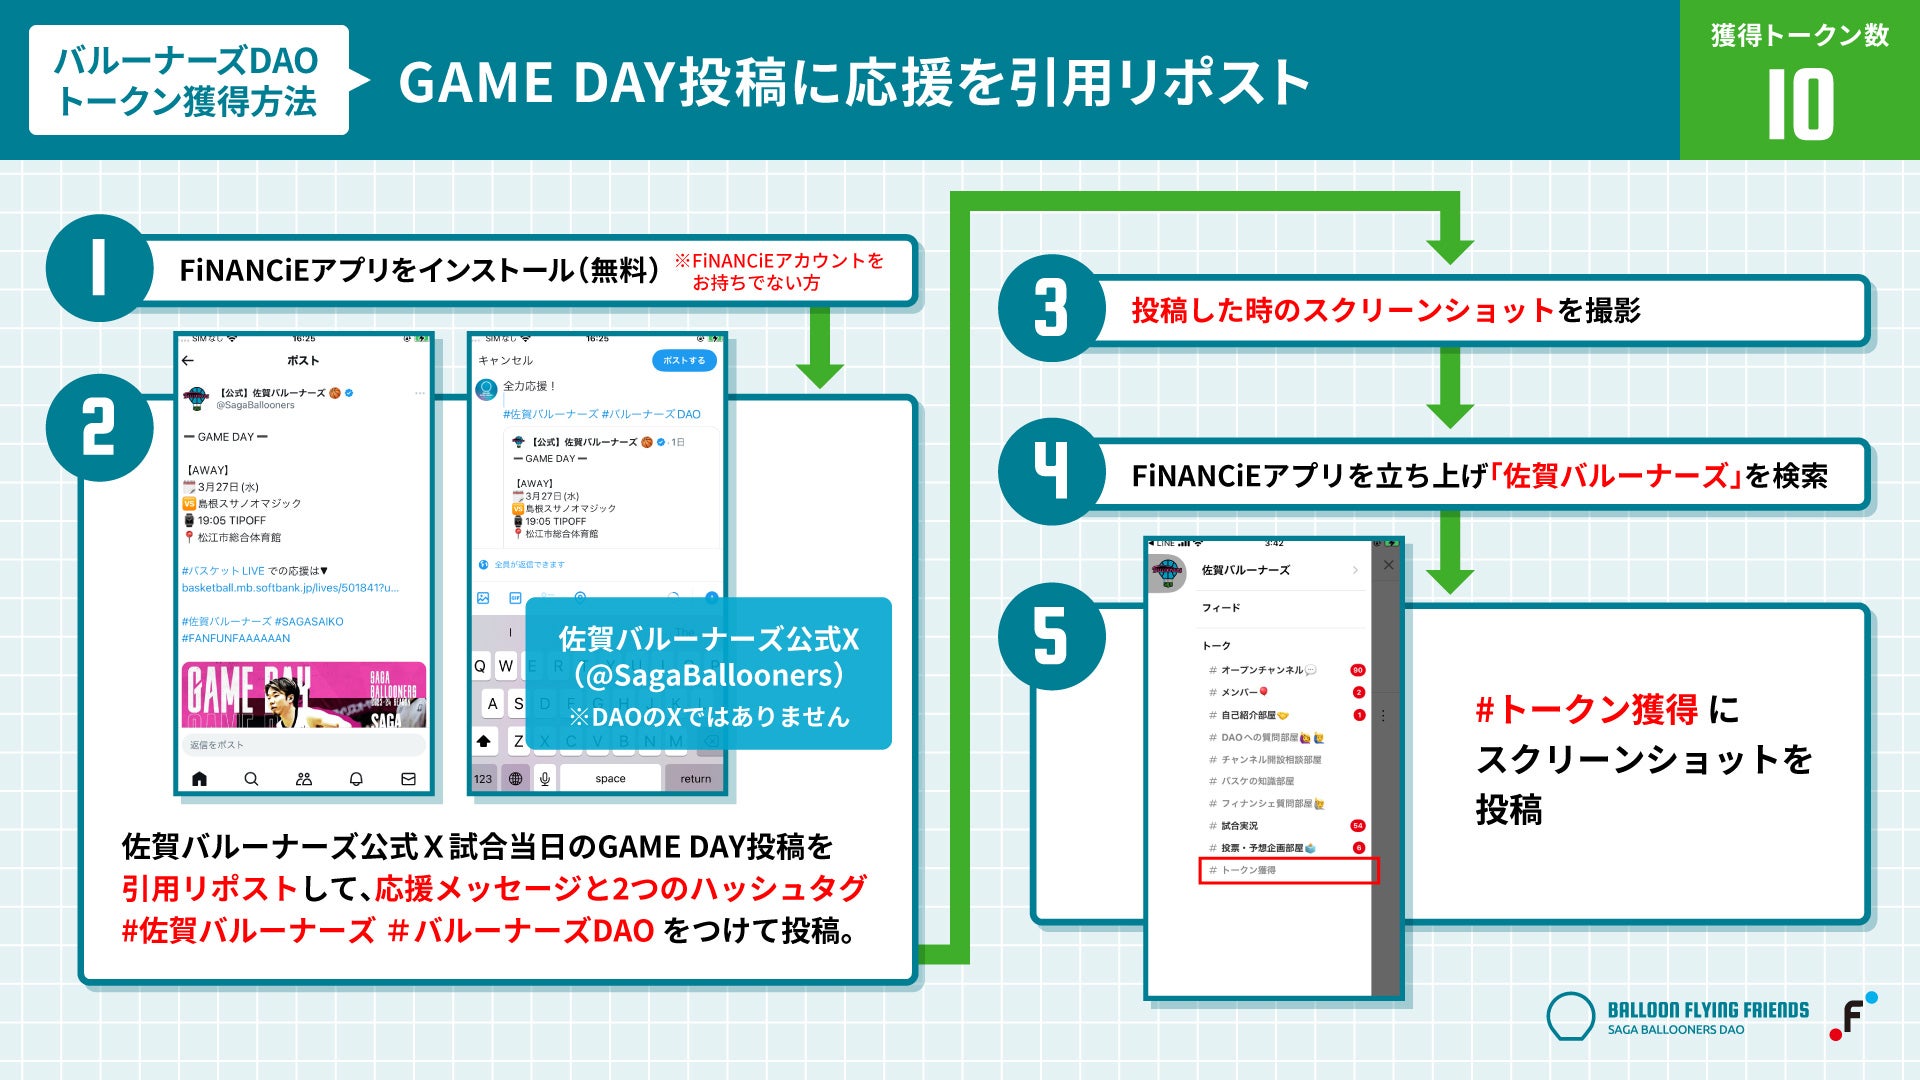 GAME DAY投稿に応援を引用リポスト